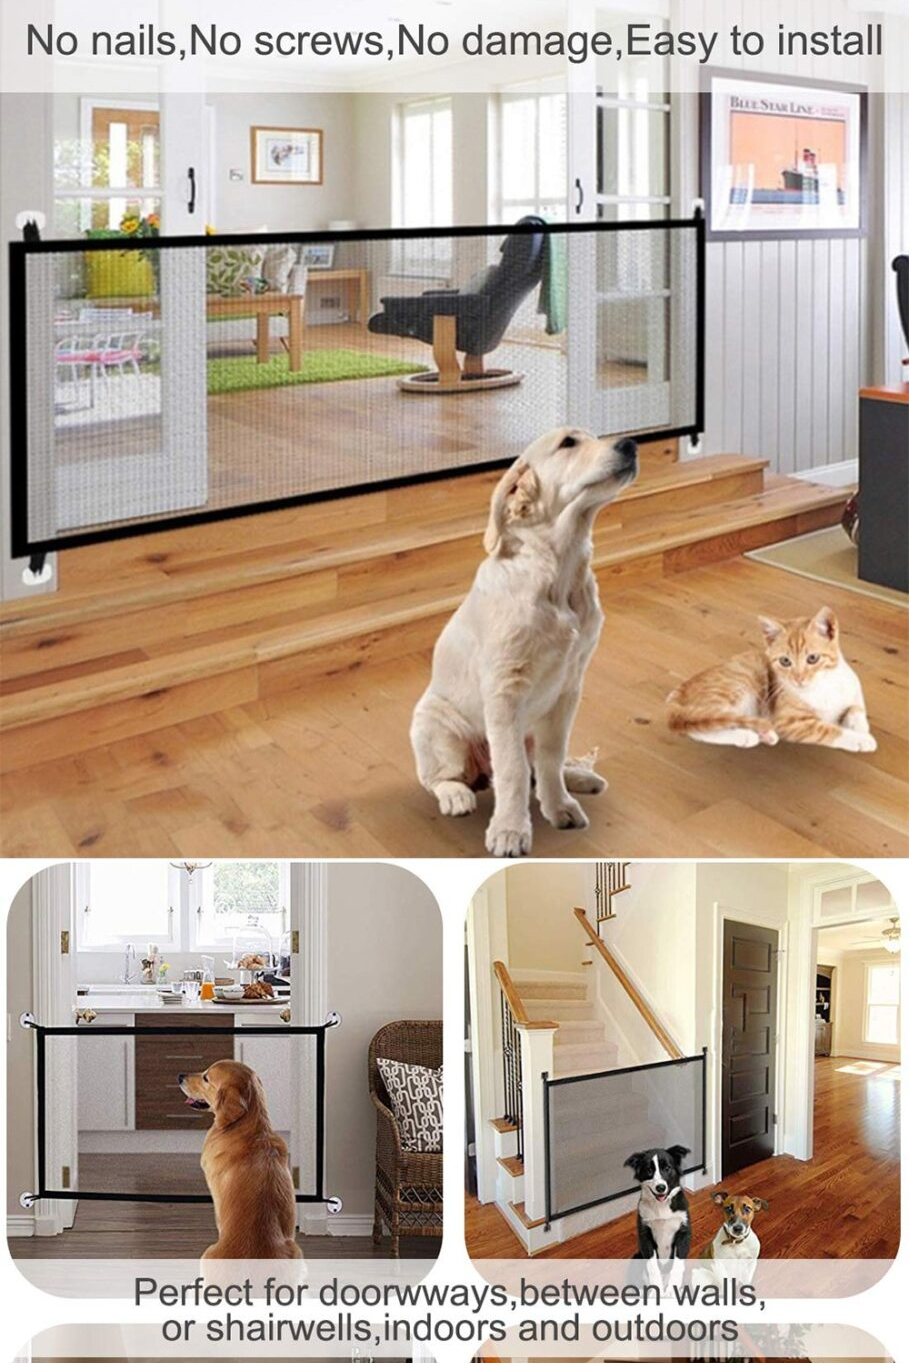 Pet Soft Magic Gate for Dogs Pet Fences Portable Folding Safe Guard Indoor and Outdoor Portable Folding Mesh Pet Gate For Cat